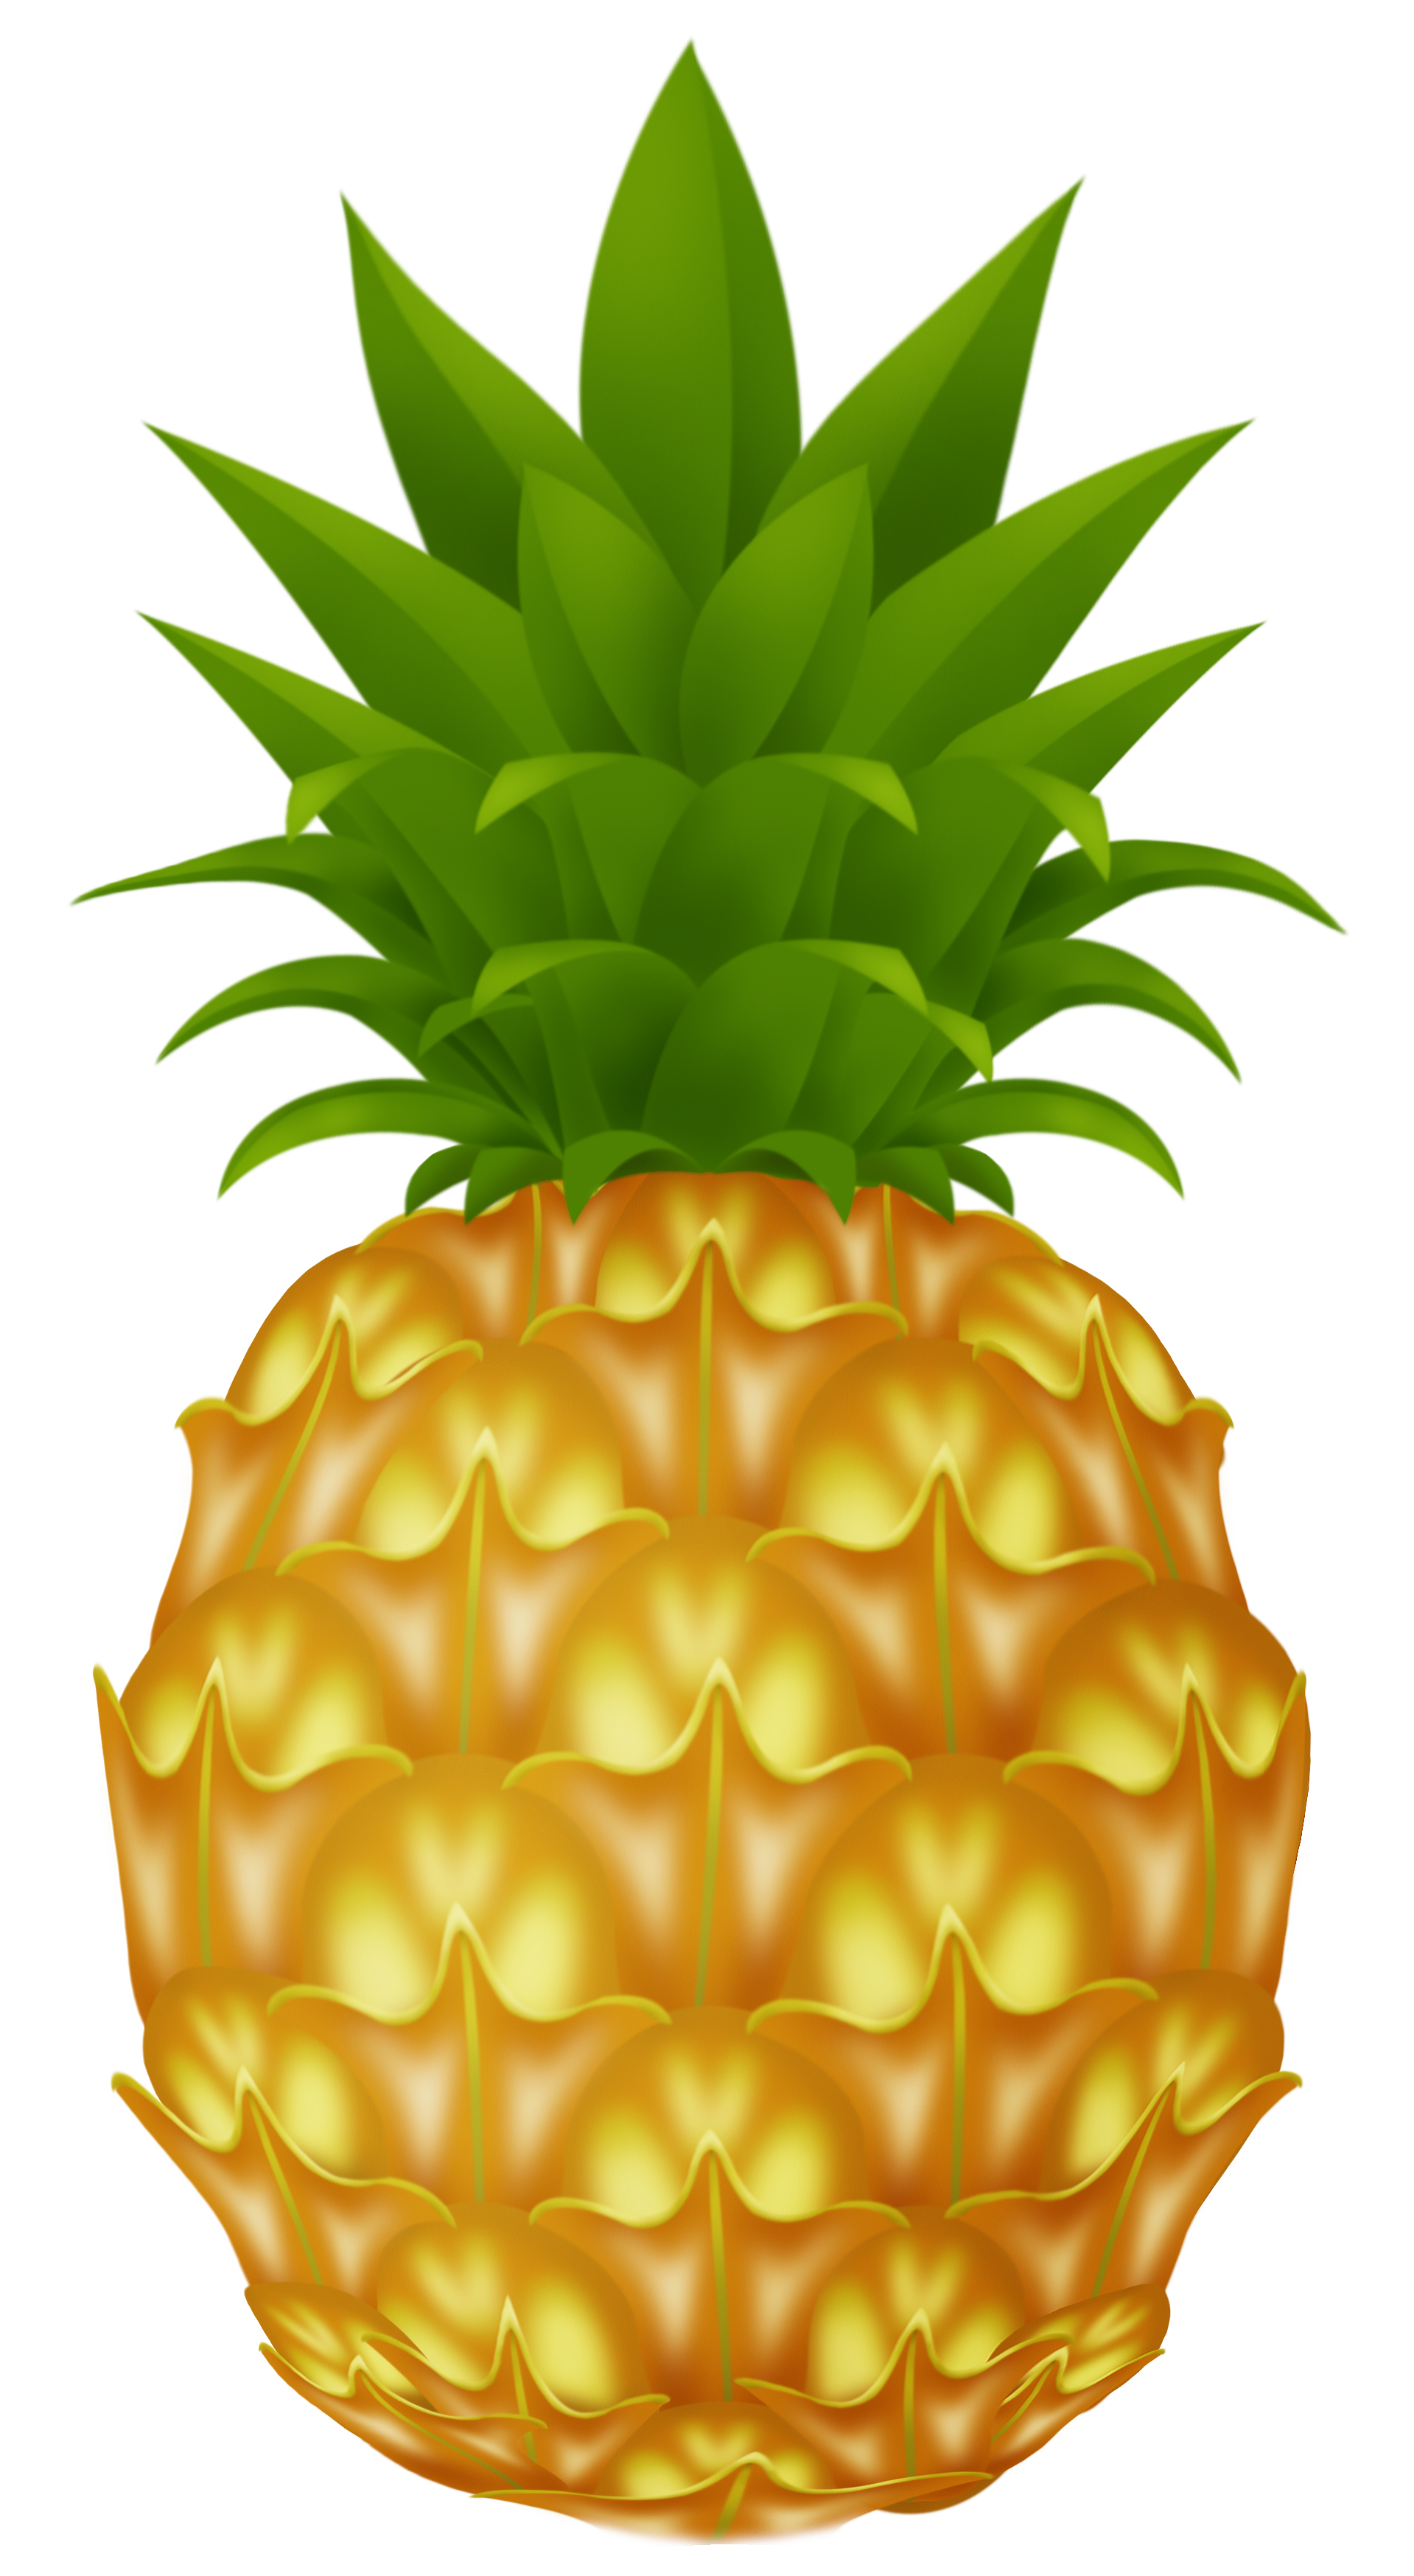 Pineapple Images Pictures Download Transparent Image Clipart